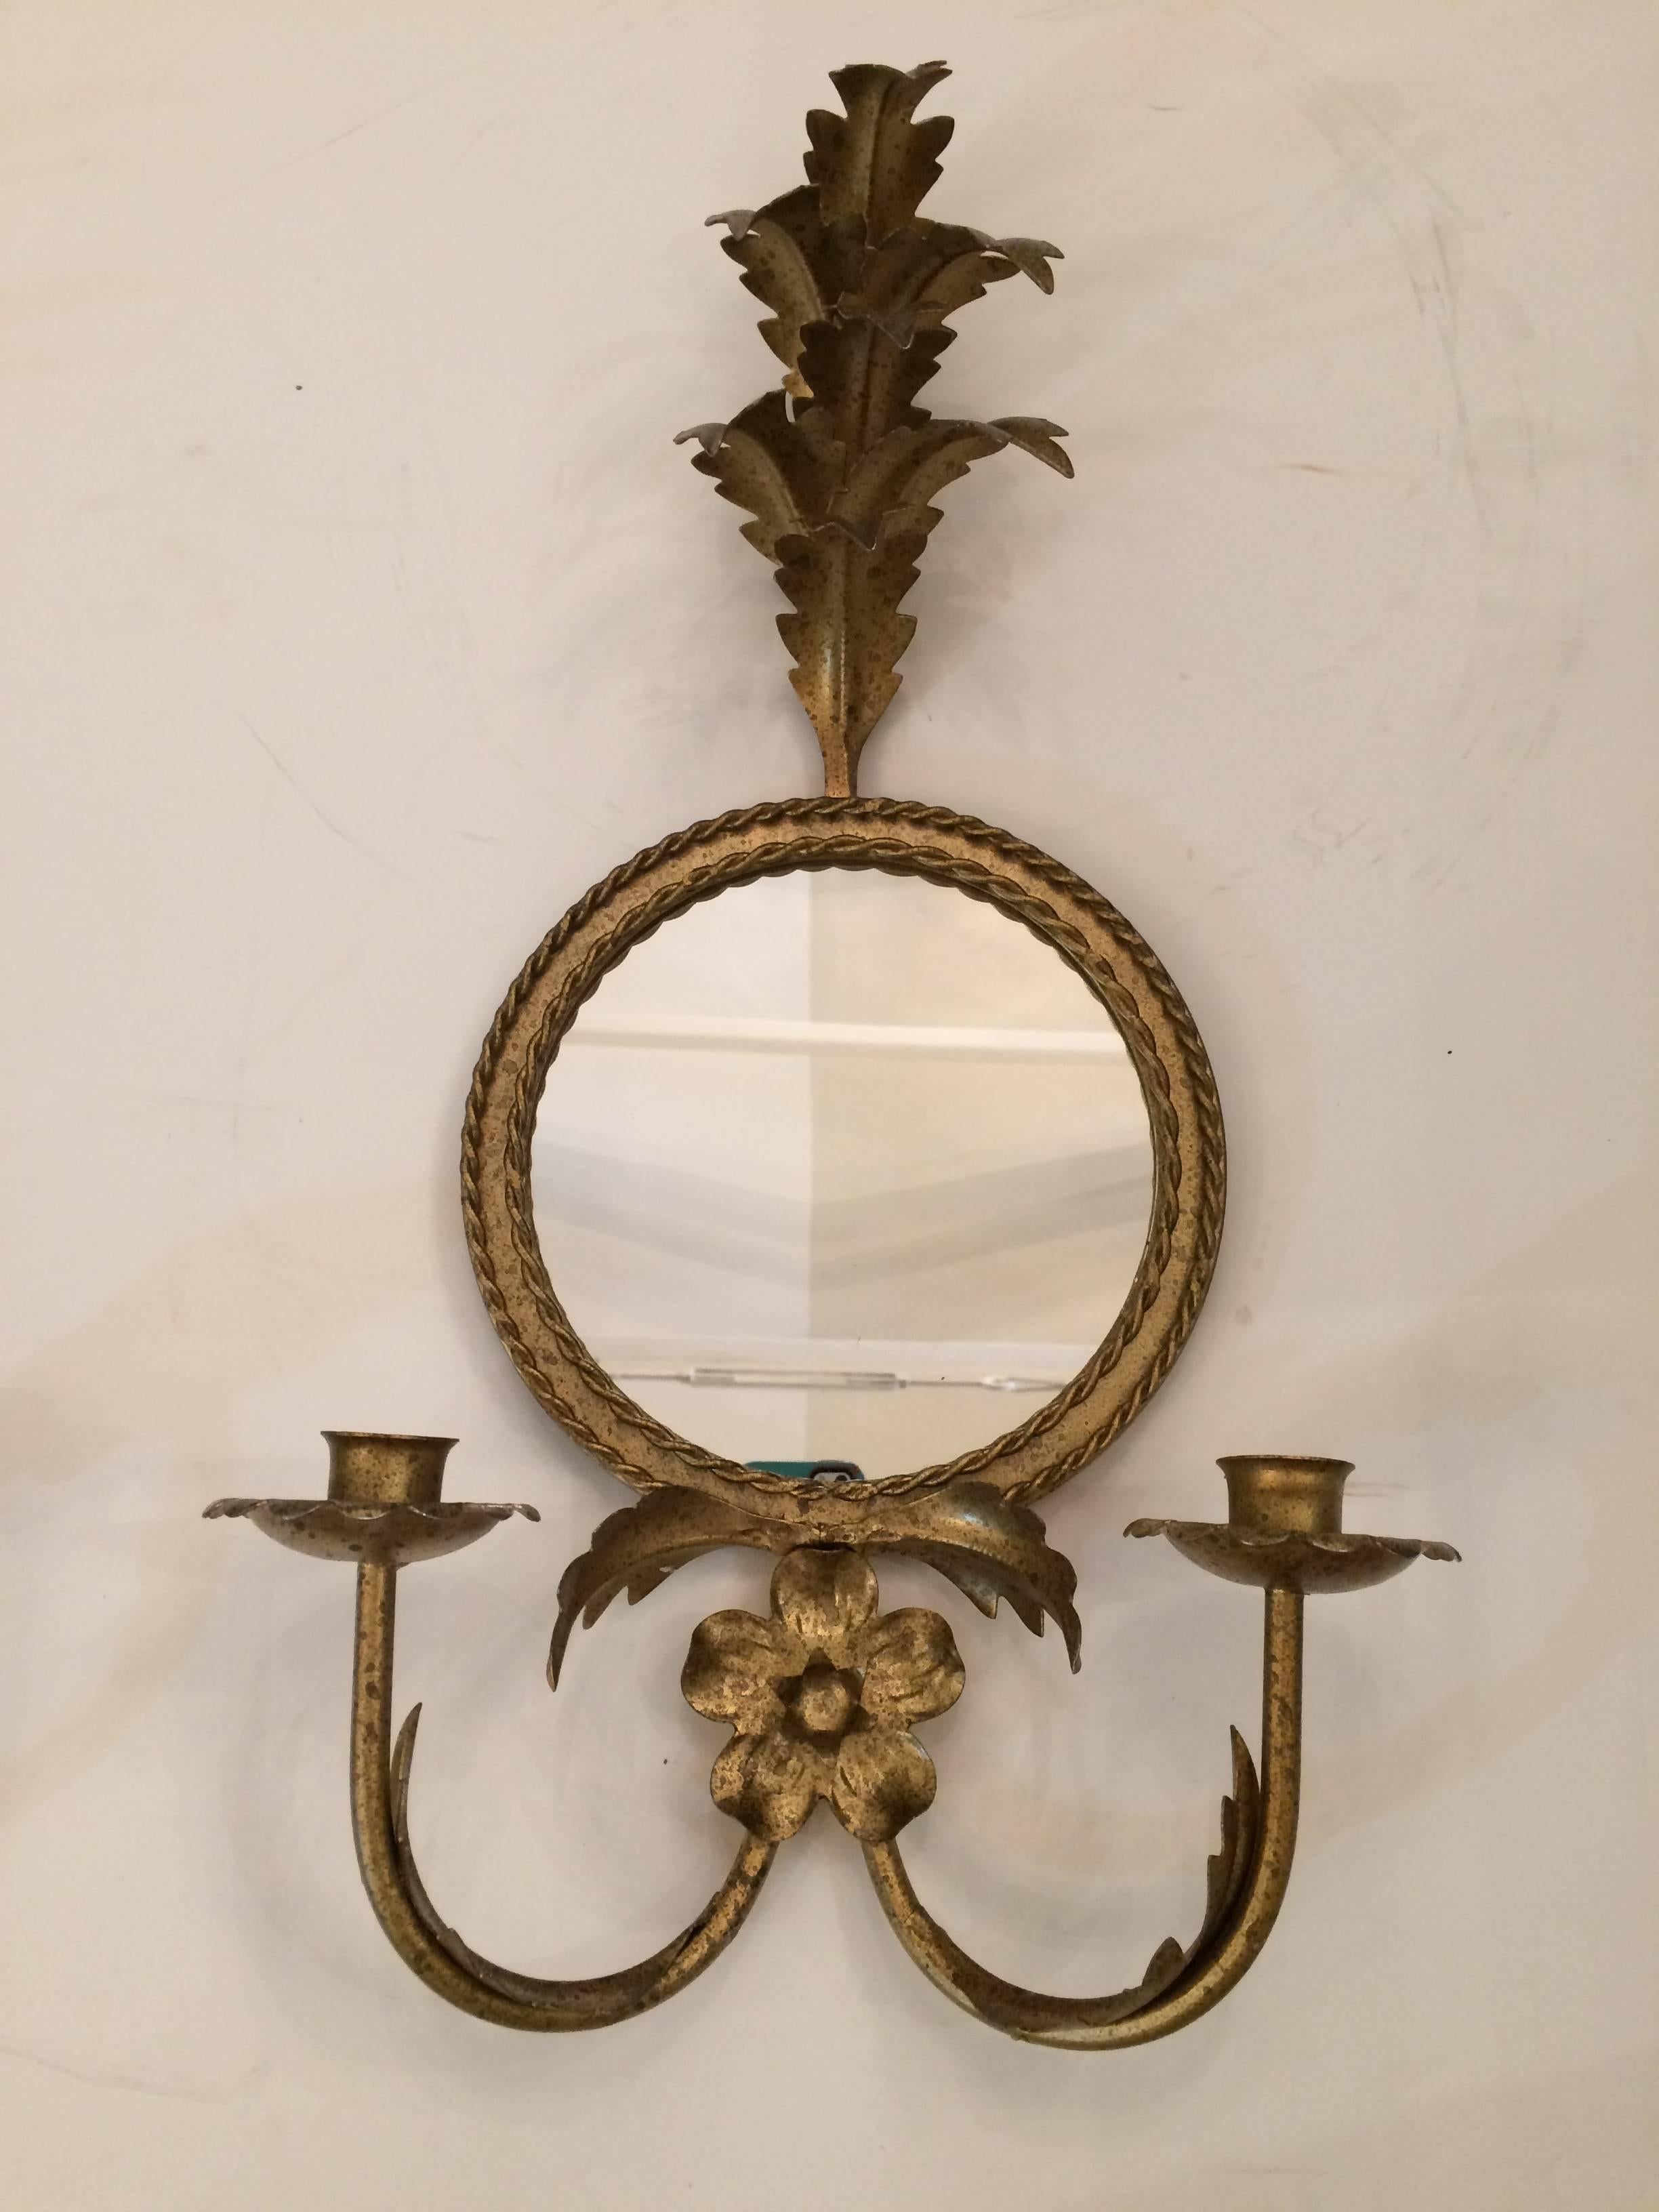 Two glamorous gilt iron and tole candle wall sconces (could be electrified) having a palm frond motif and 7.5 inch diameter round mirrors.